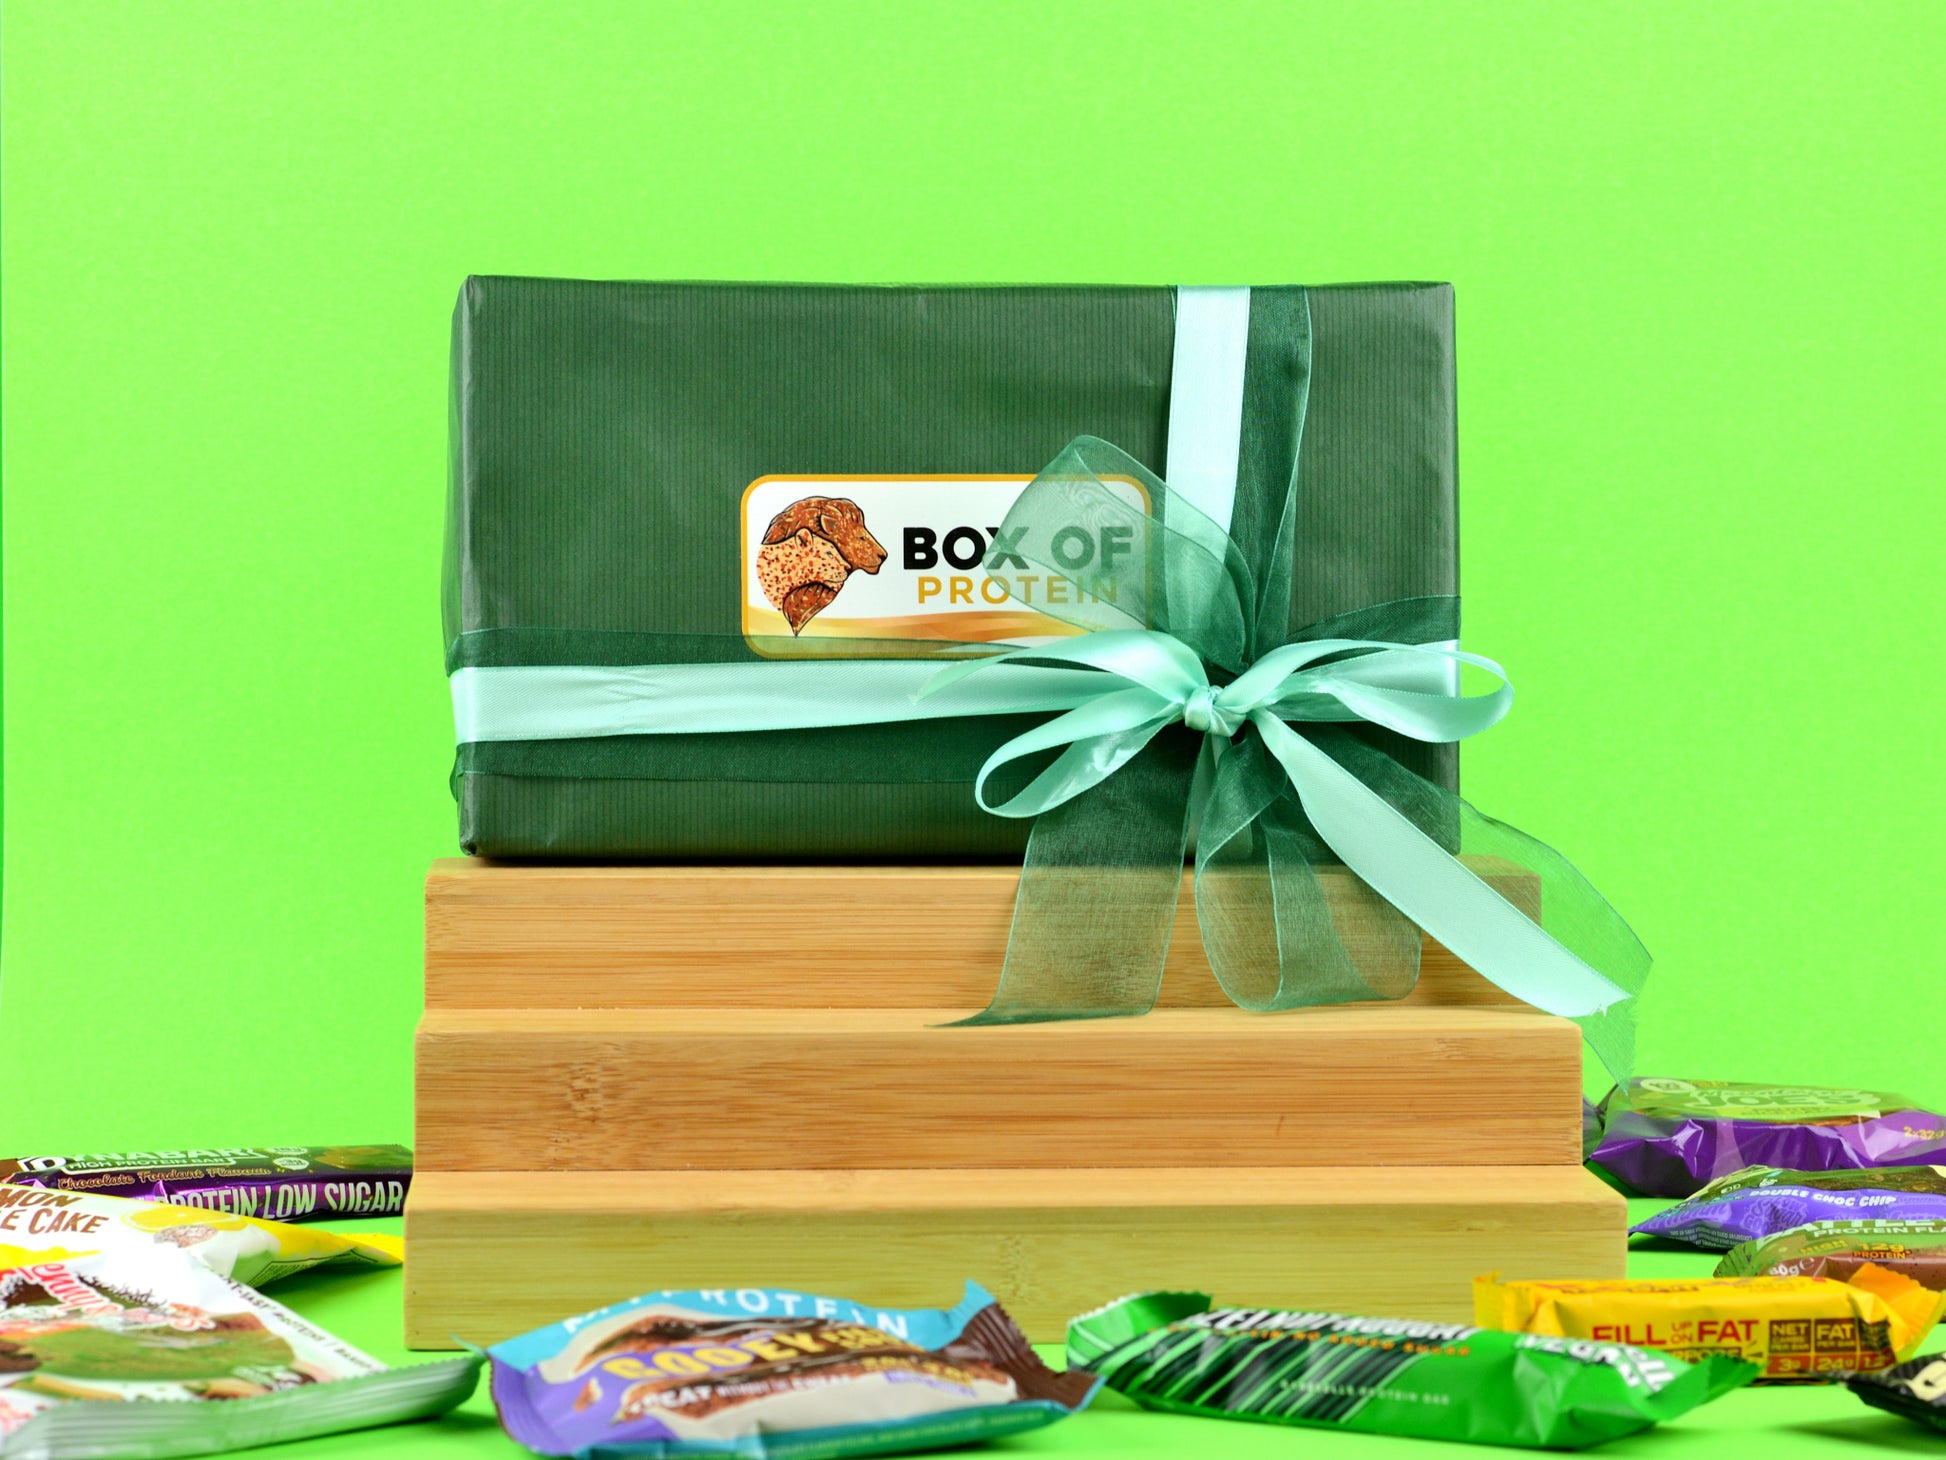 Box Of Protein | Vegan Diet Box | Diet Protein Boxes | Protein Snacks Hamper | Gym Gift Snacks | Battle Bites, Battle Oats, Barbells, ON Optimum Nutrition, MyProtein, Barebells, MyProtein, Boostball, Keto Keto, Yummo;s, Mountain Joe | Ribbons | Gift Wrapping | Gift Box